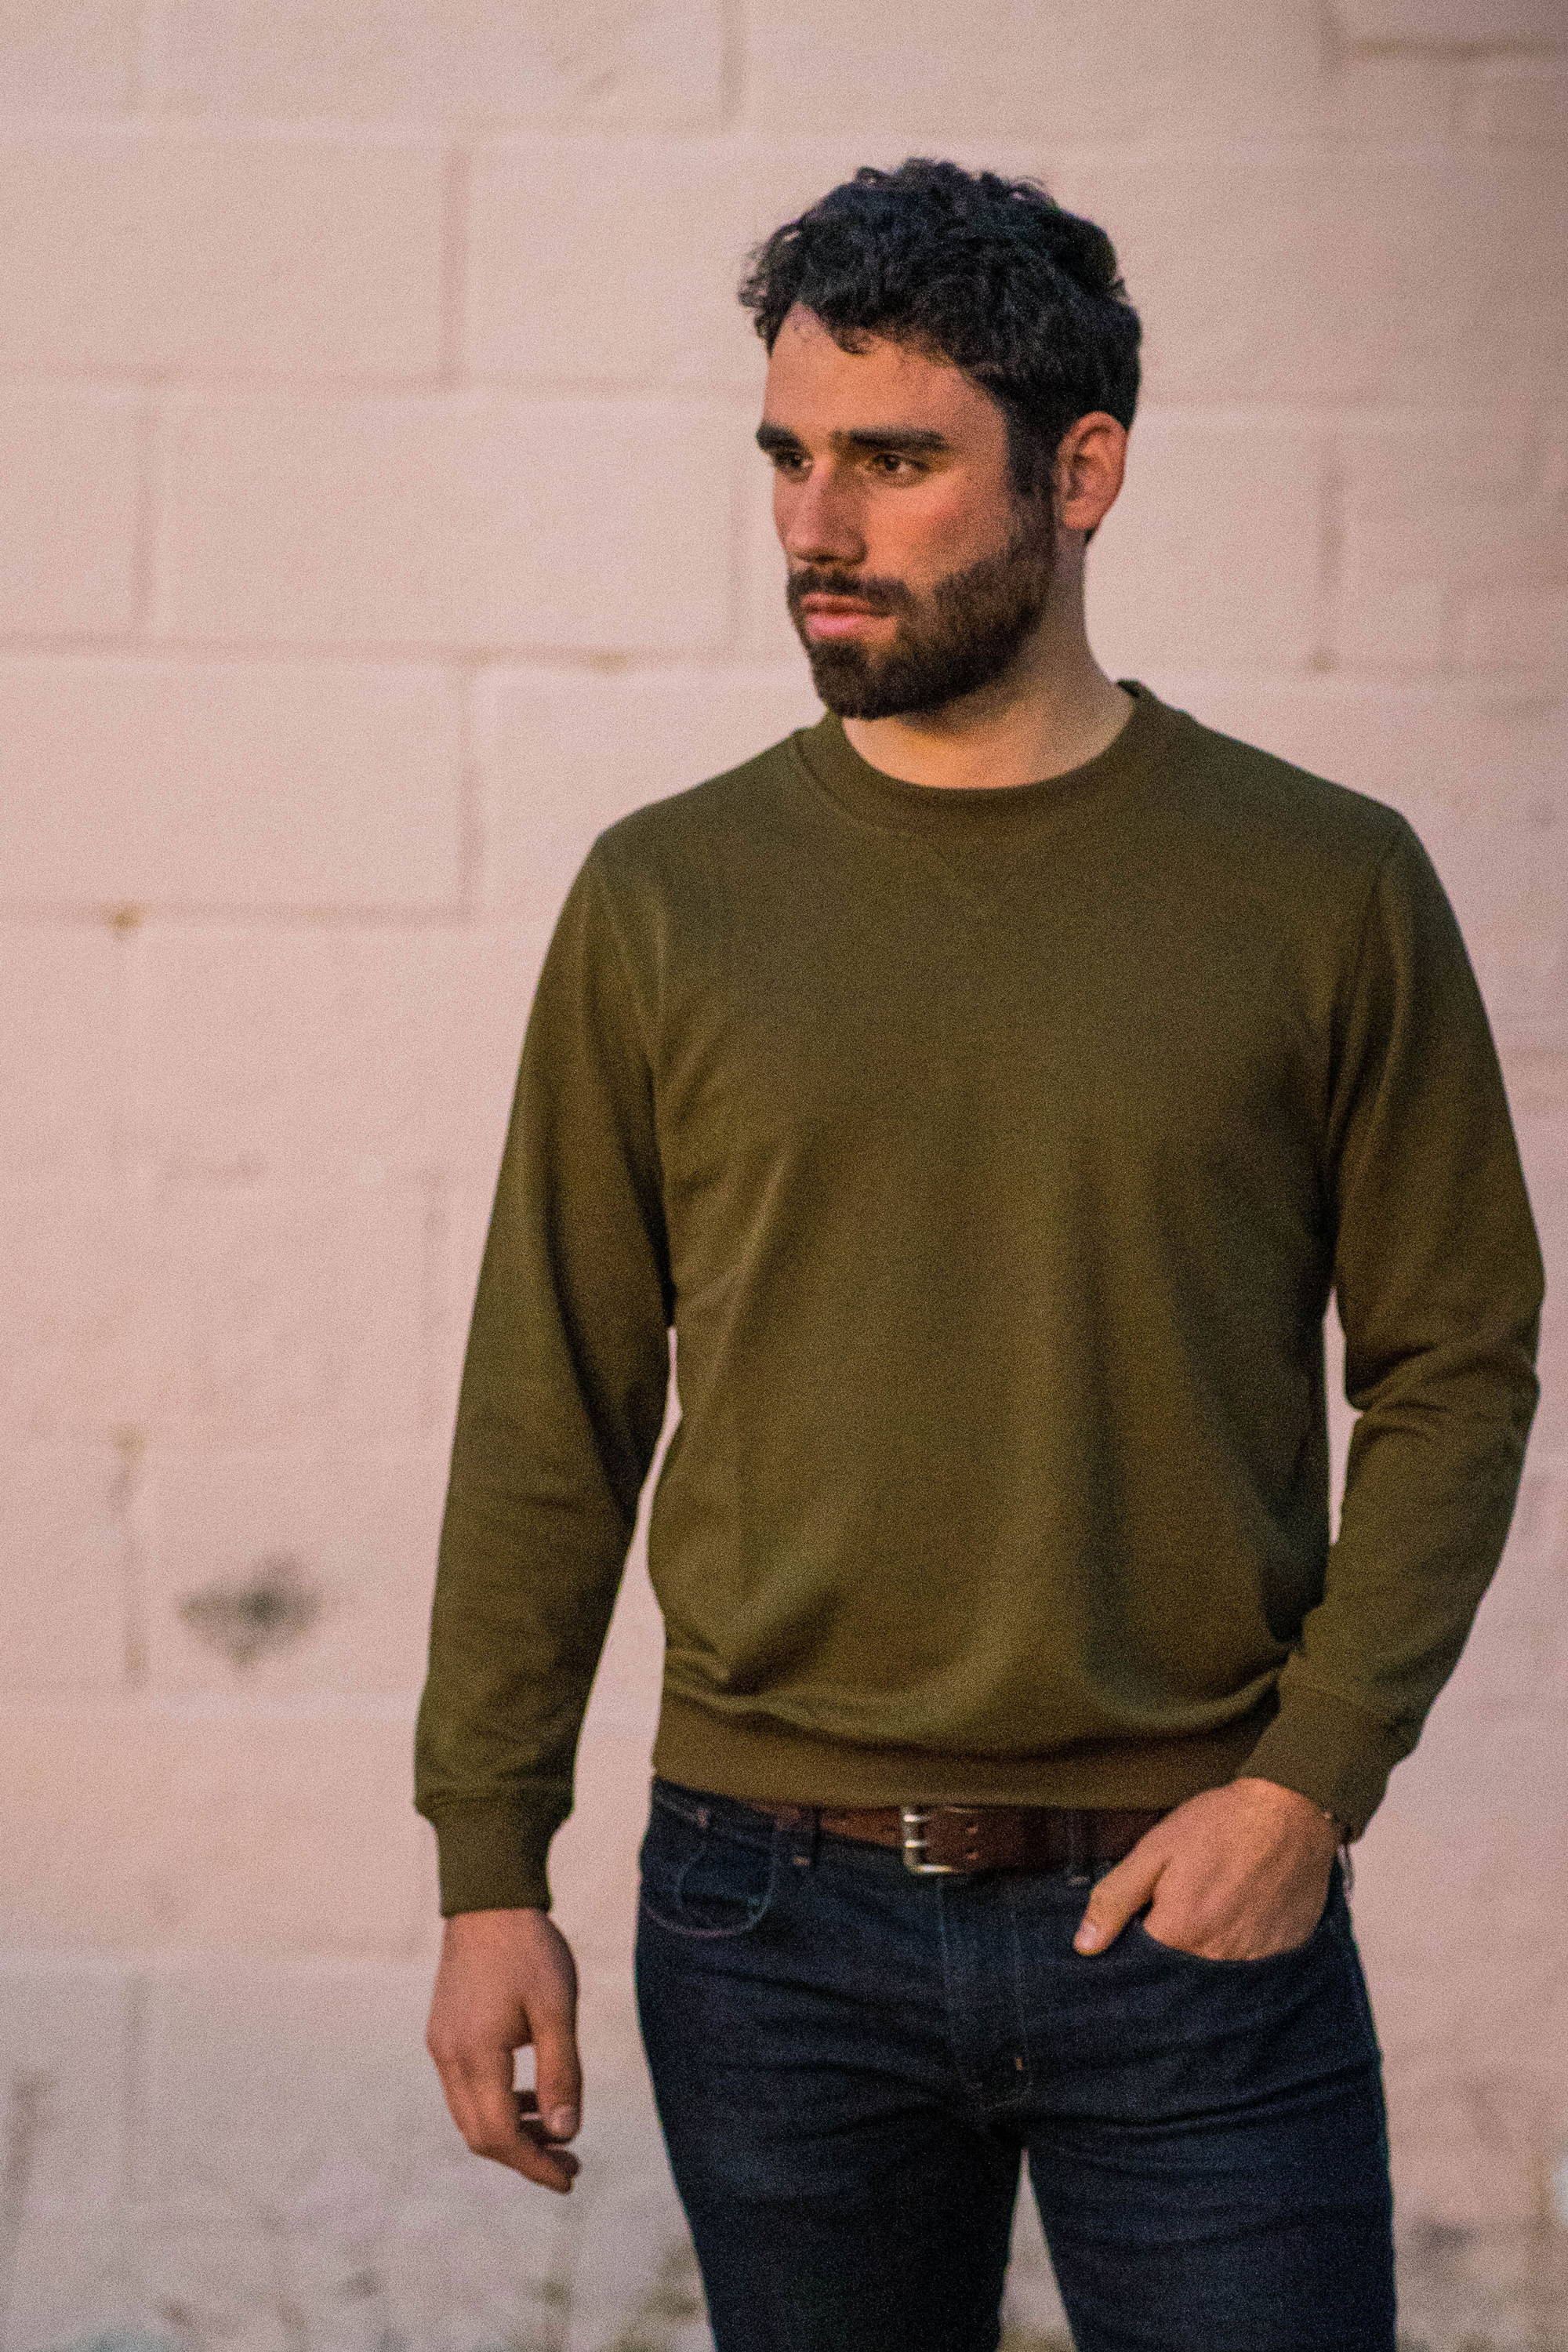 Man standing wearing a green sweatshirt and blue jeans from under510.com